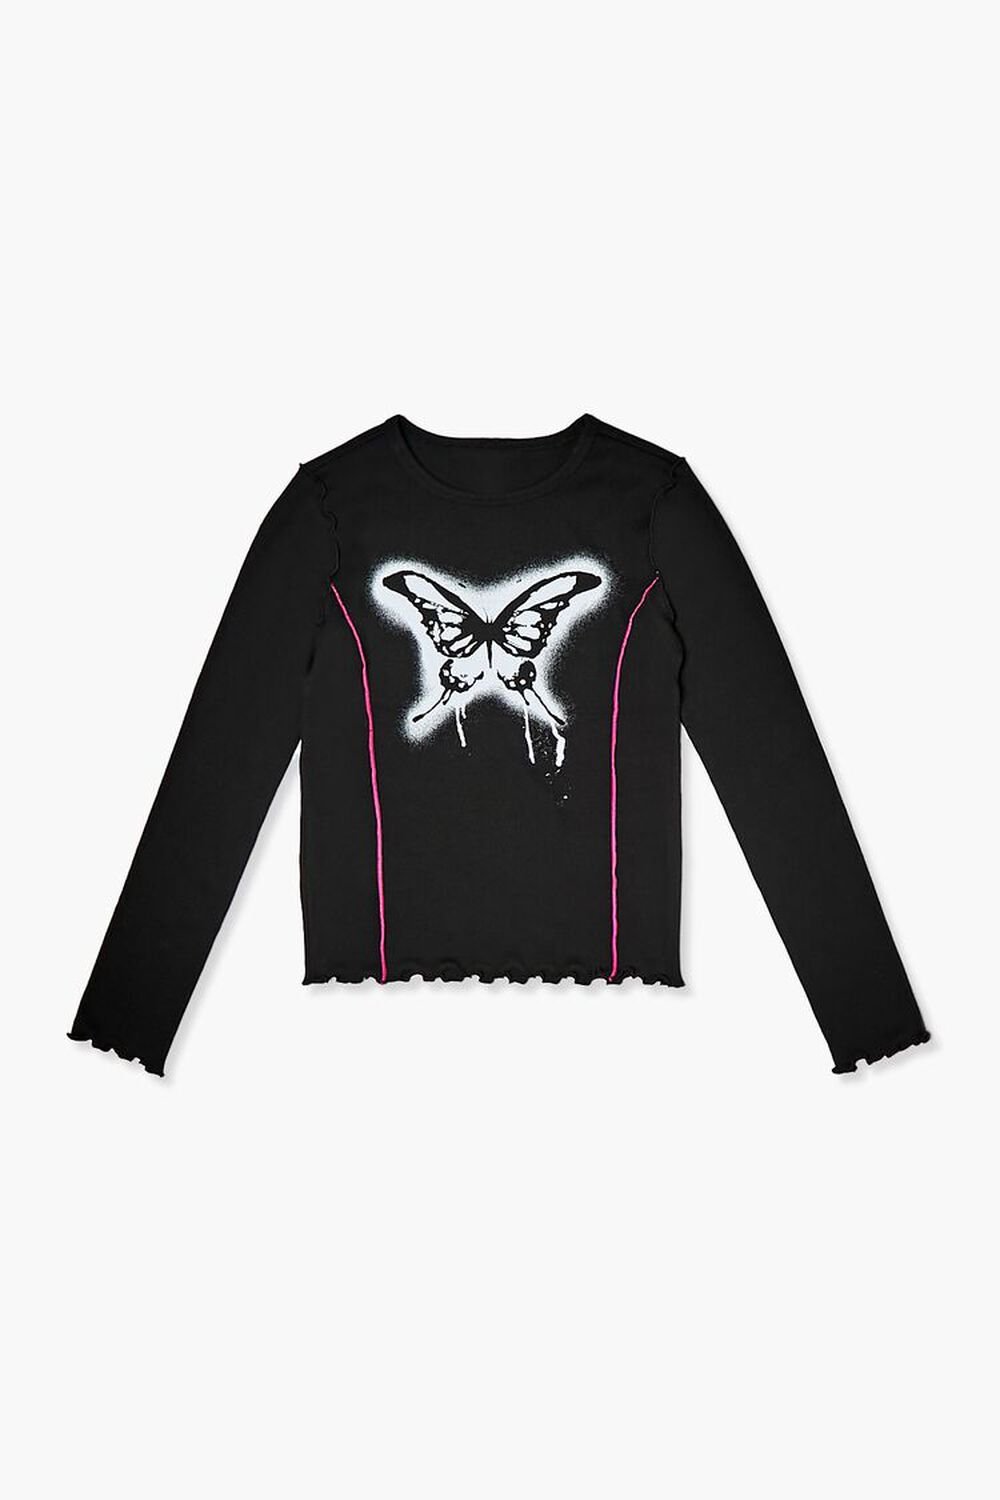 BLACK/WHITE Girls Butterfly Graphic Top (Kids), image 1